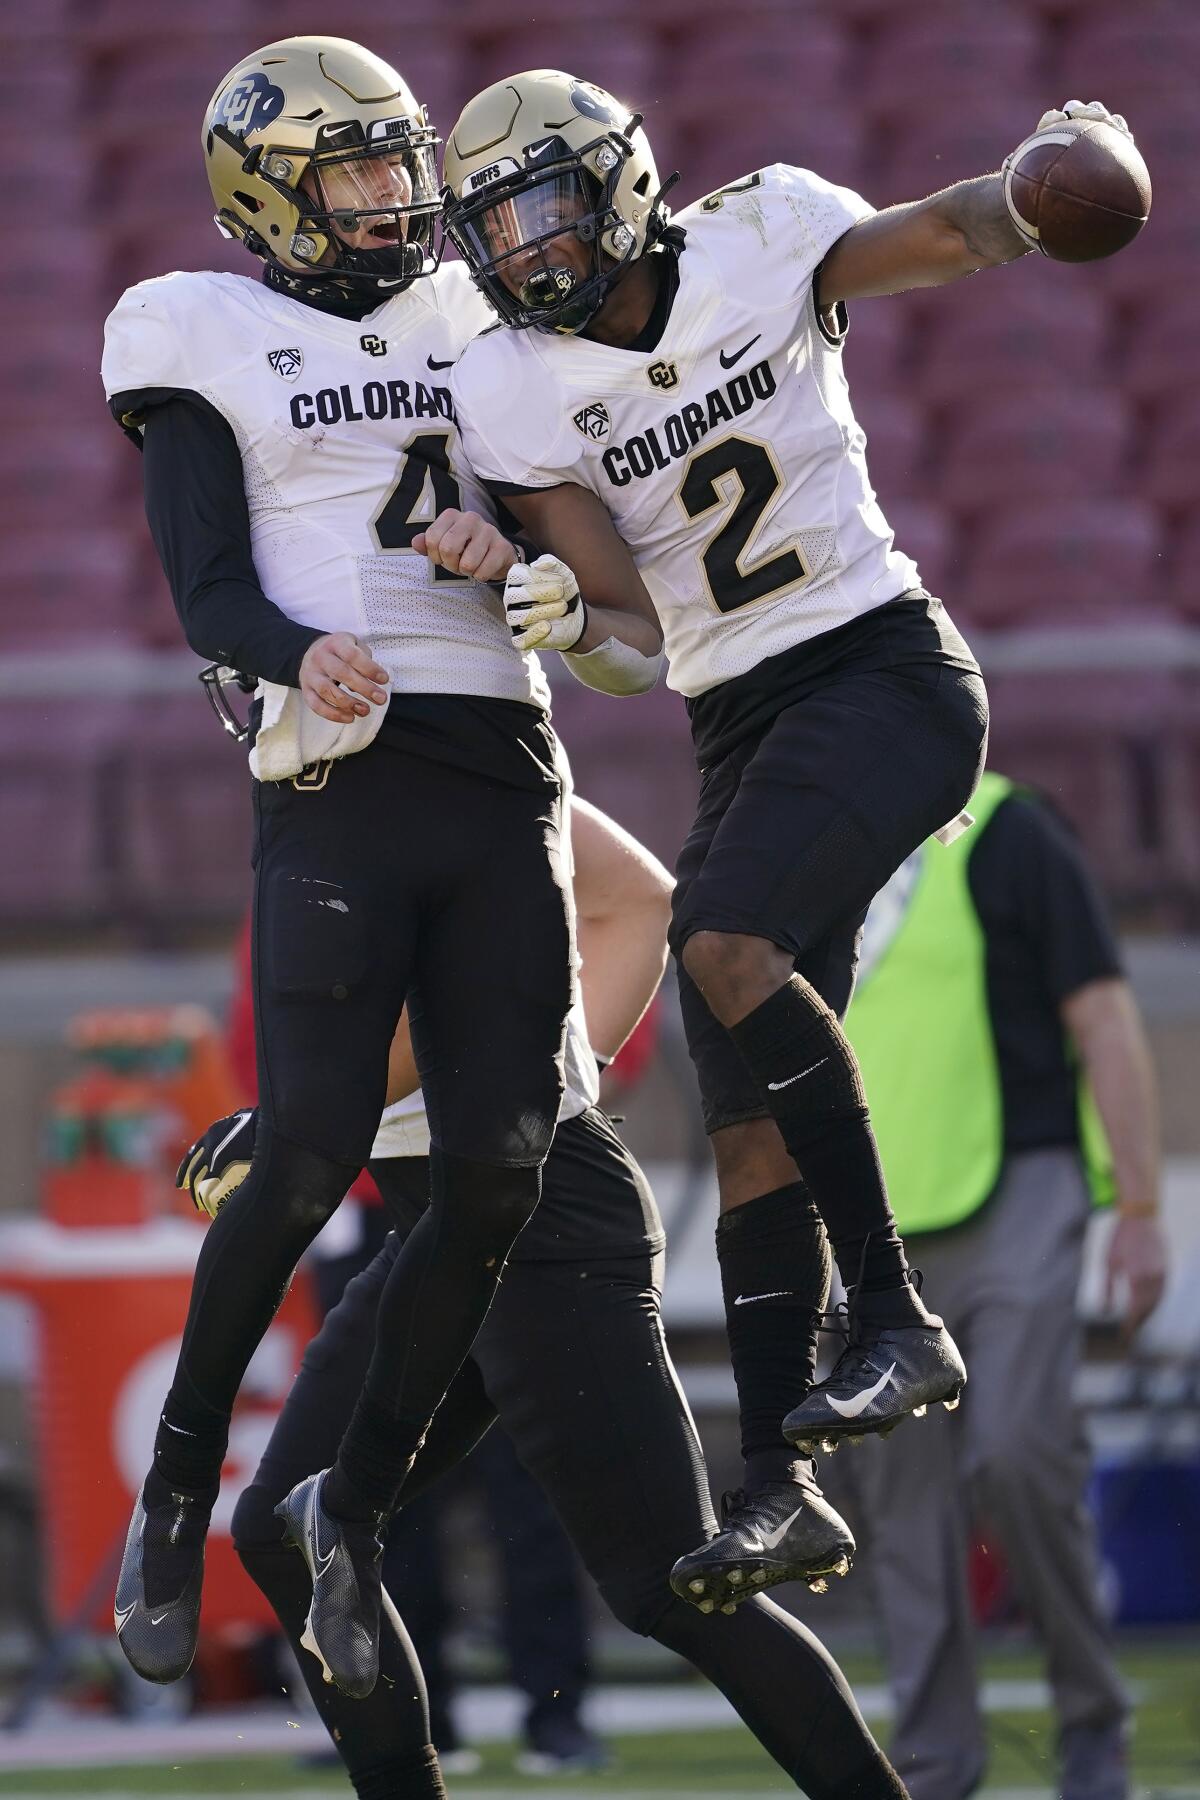 Rice & shine: Son of Jerry Rice carving own path at Colorado - The San  Diego Union-Tribune